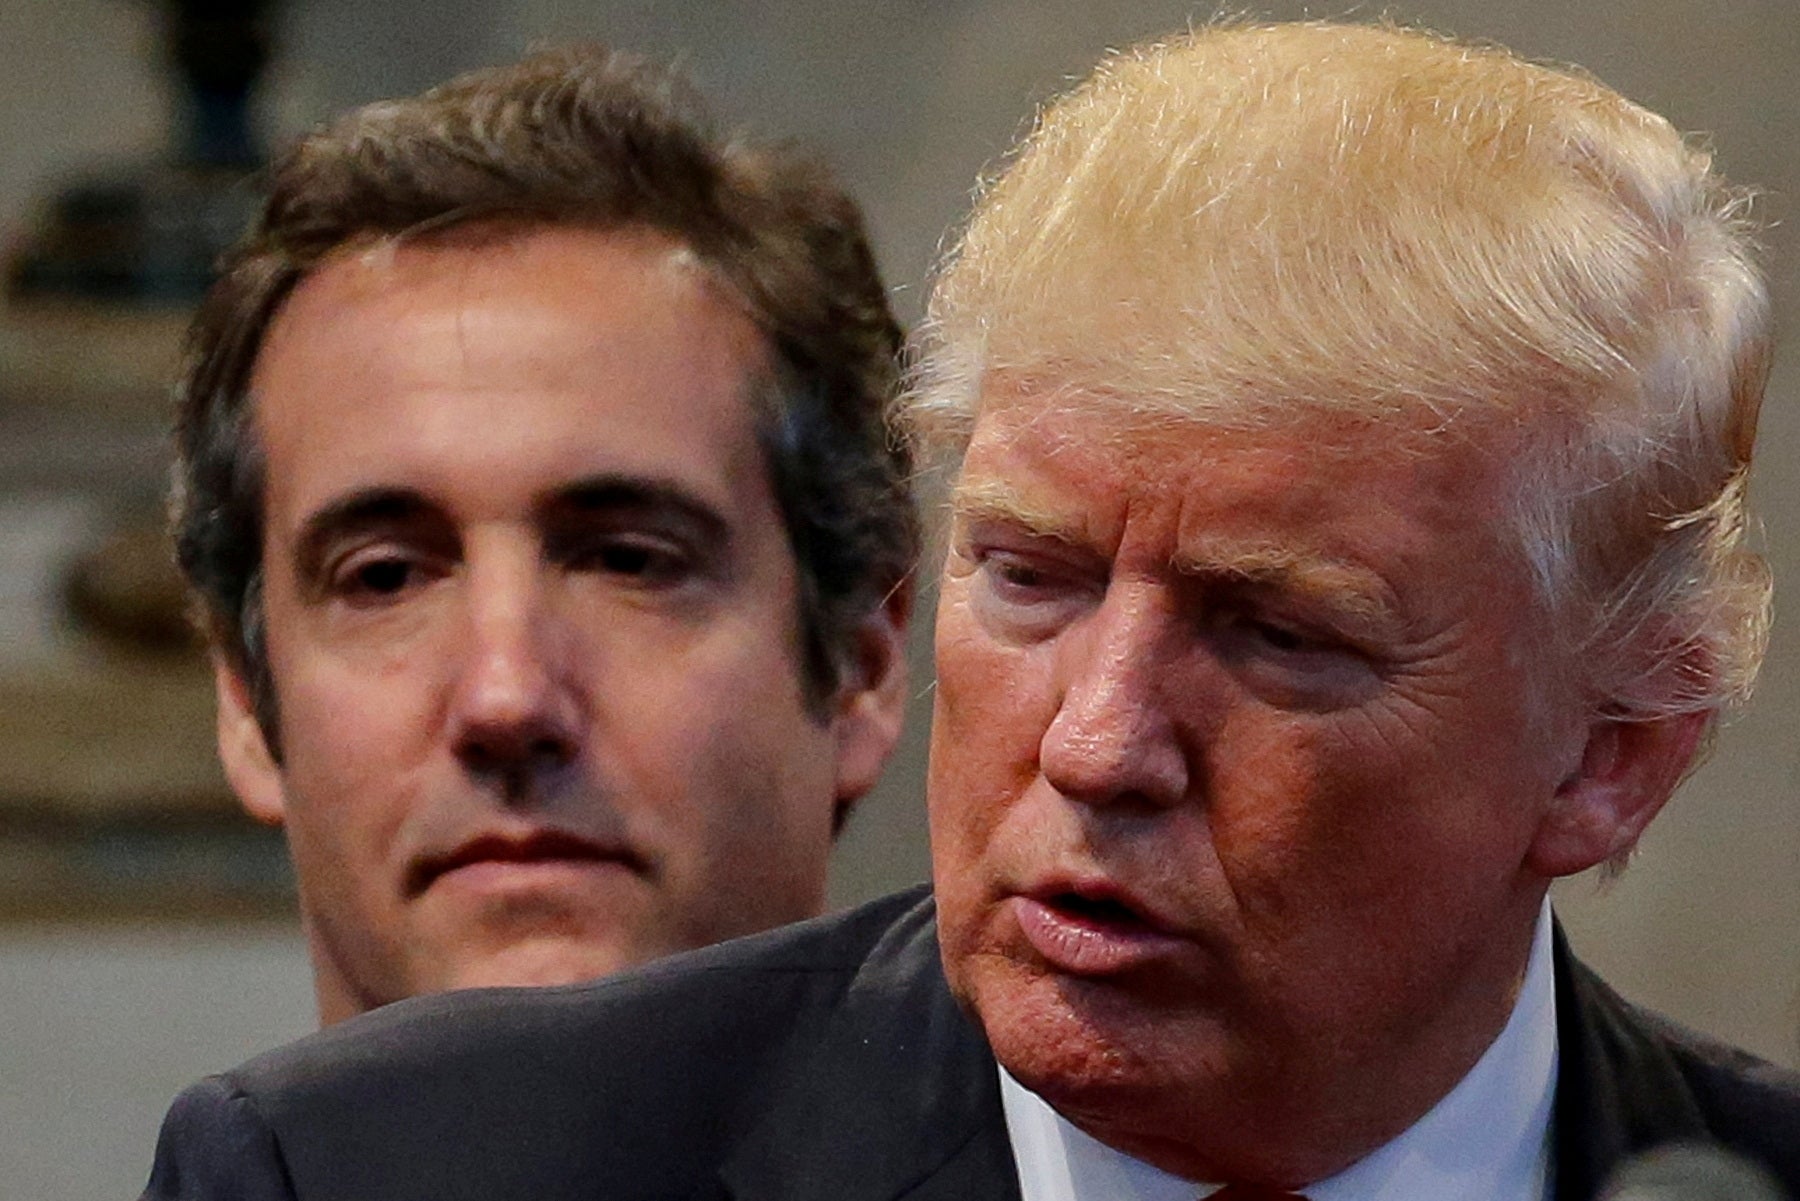 Donald Trump and Michael Cohen during a campaign stop in Ohio, 2016